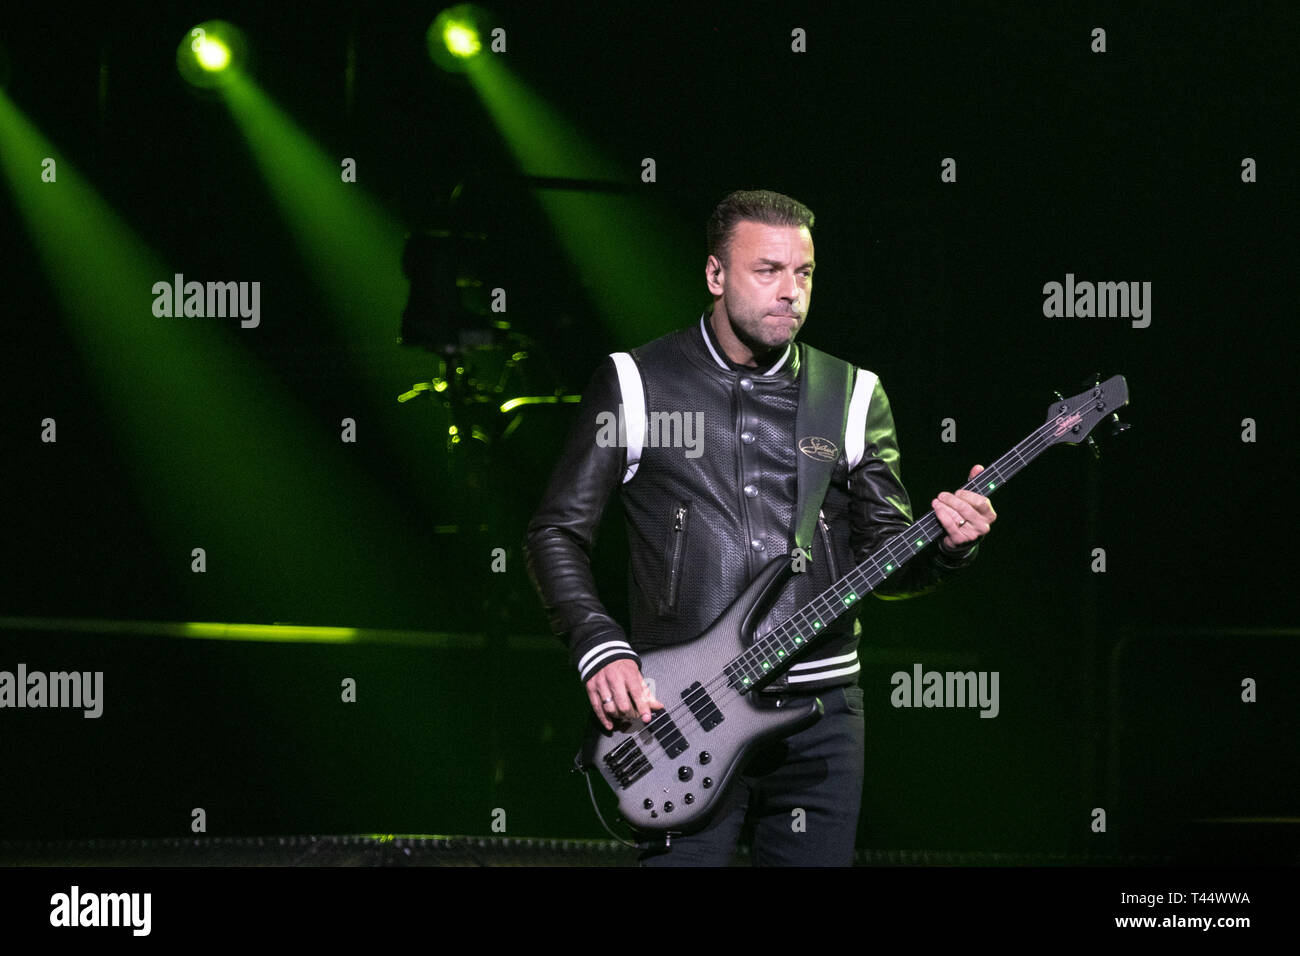 April 12 19 Chicago Illinois U S Chris Wolstenholme Of Muse During The Simulation Theory Tour At United Center In Chicago Illinois Credit Image C Daniel Deslover Zuma Wire Stock Photo Alamy